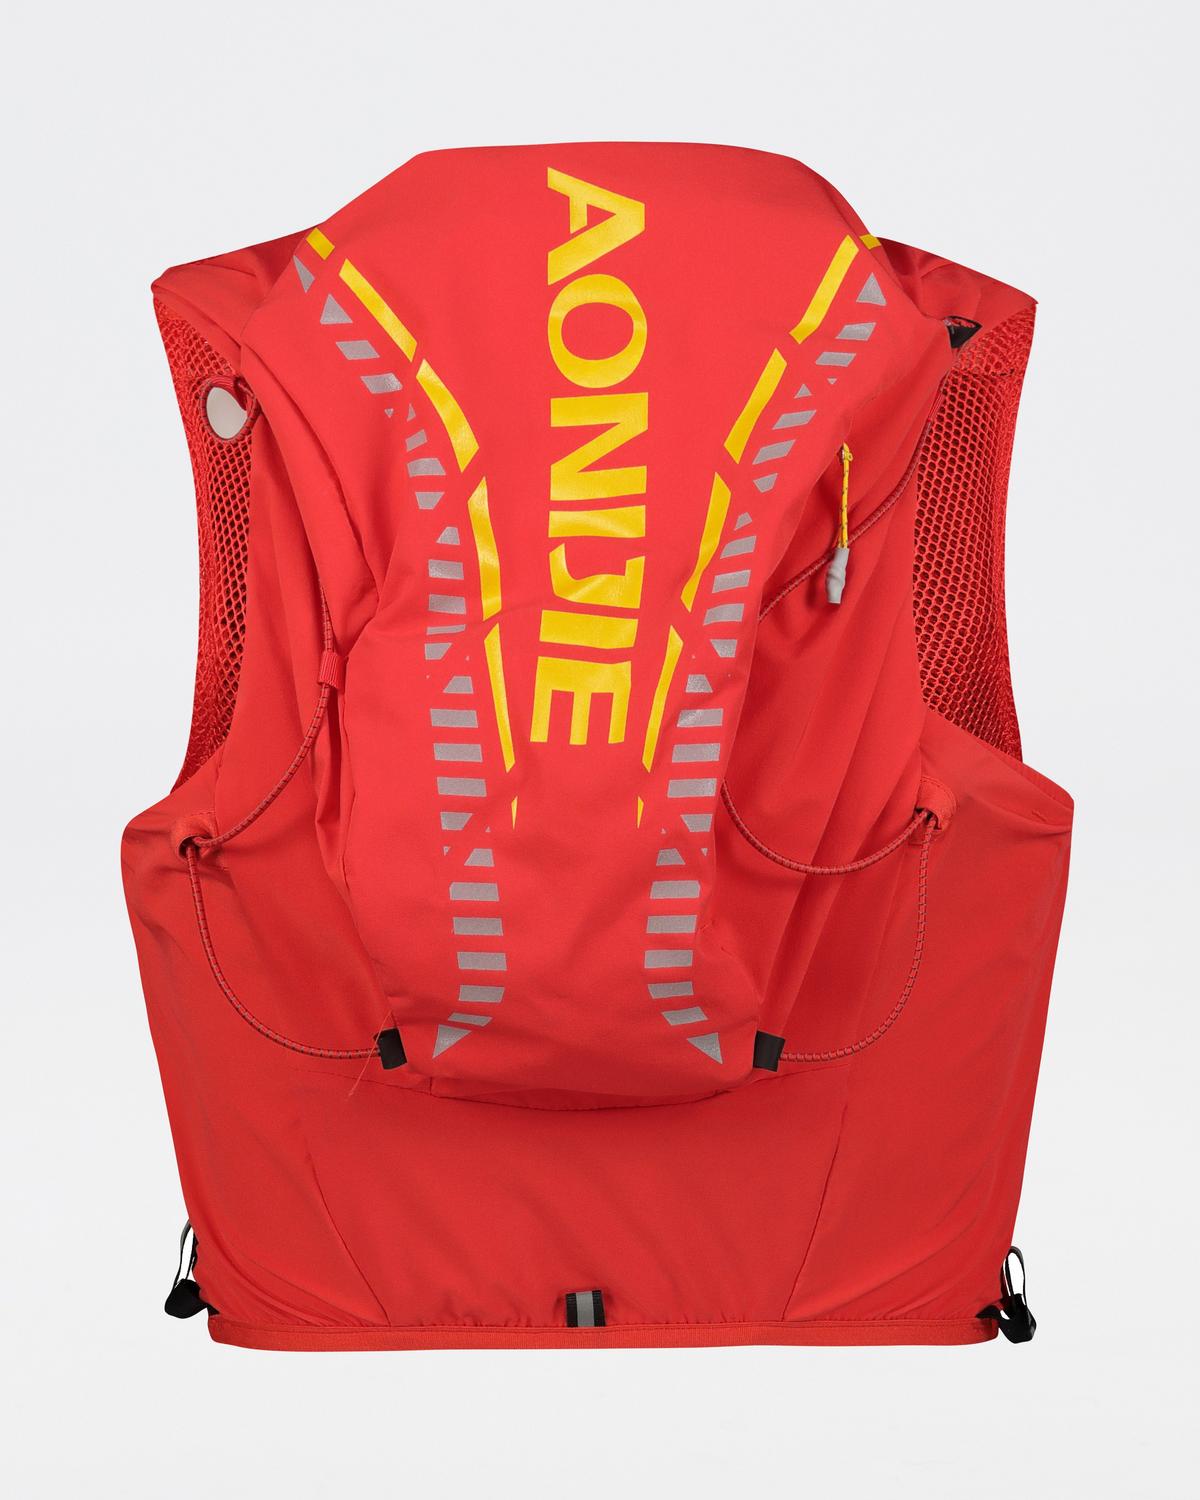 Aonijie Moderate Gale 12L Hydration Vest -  Red